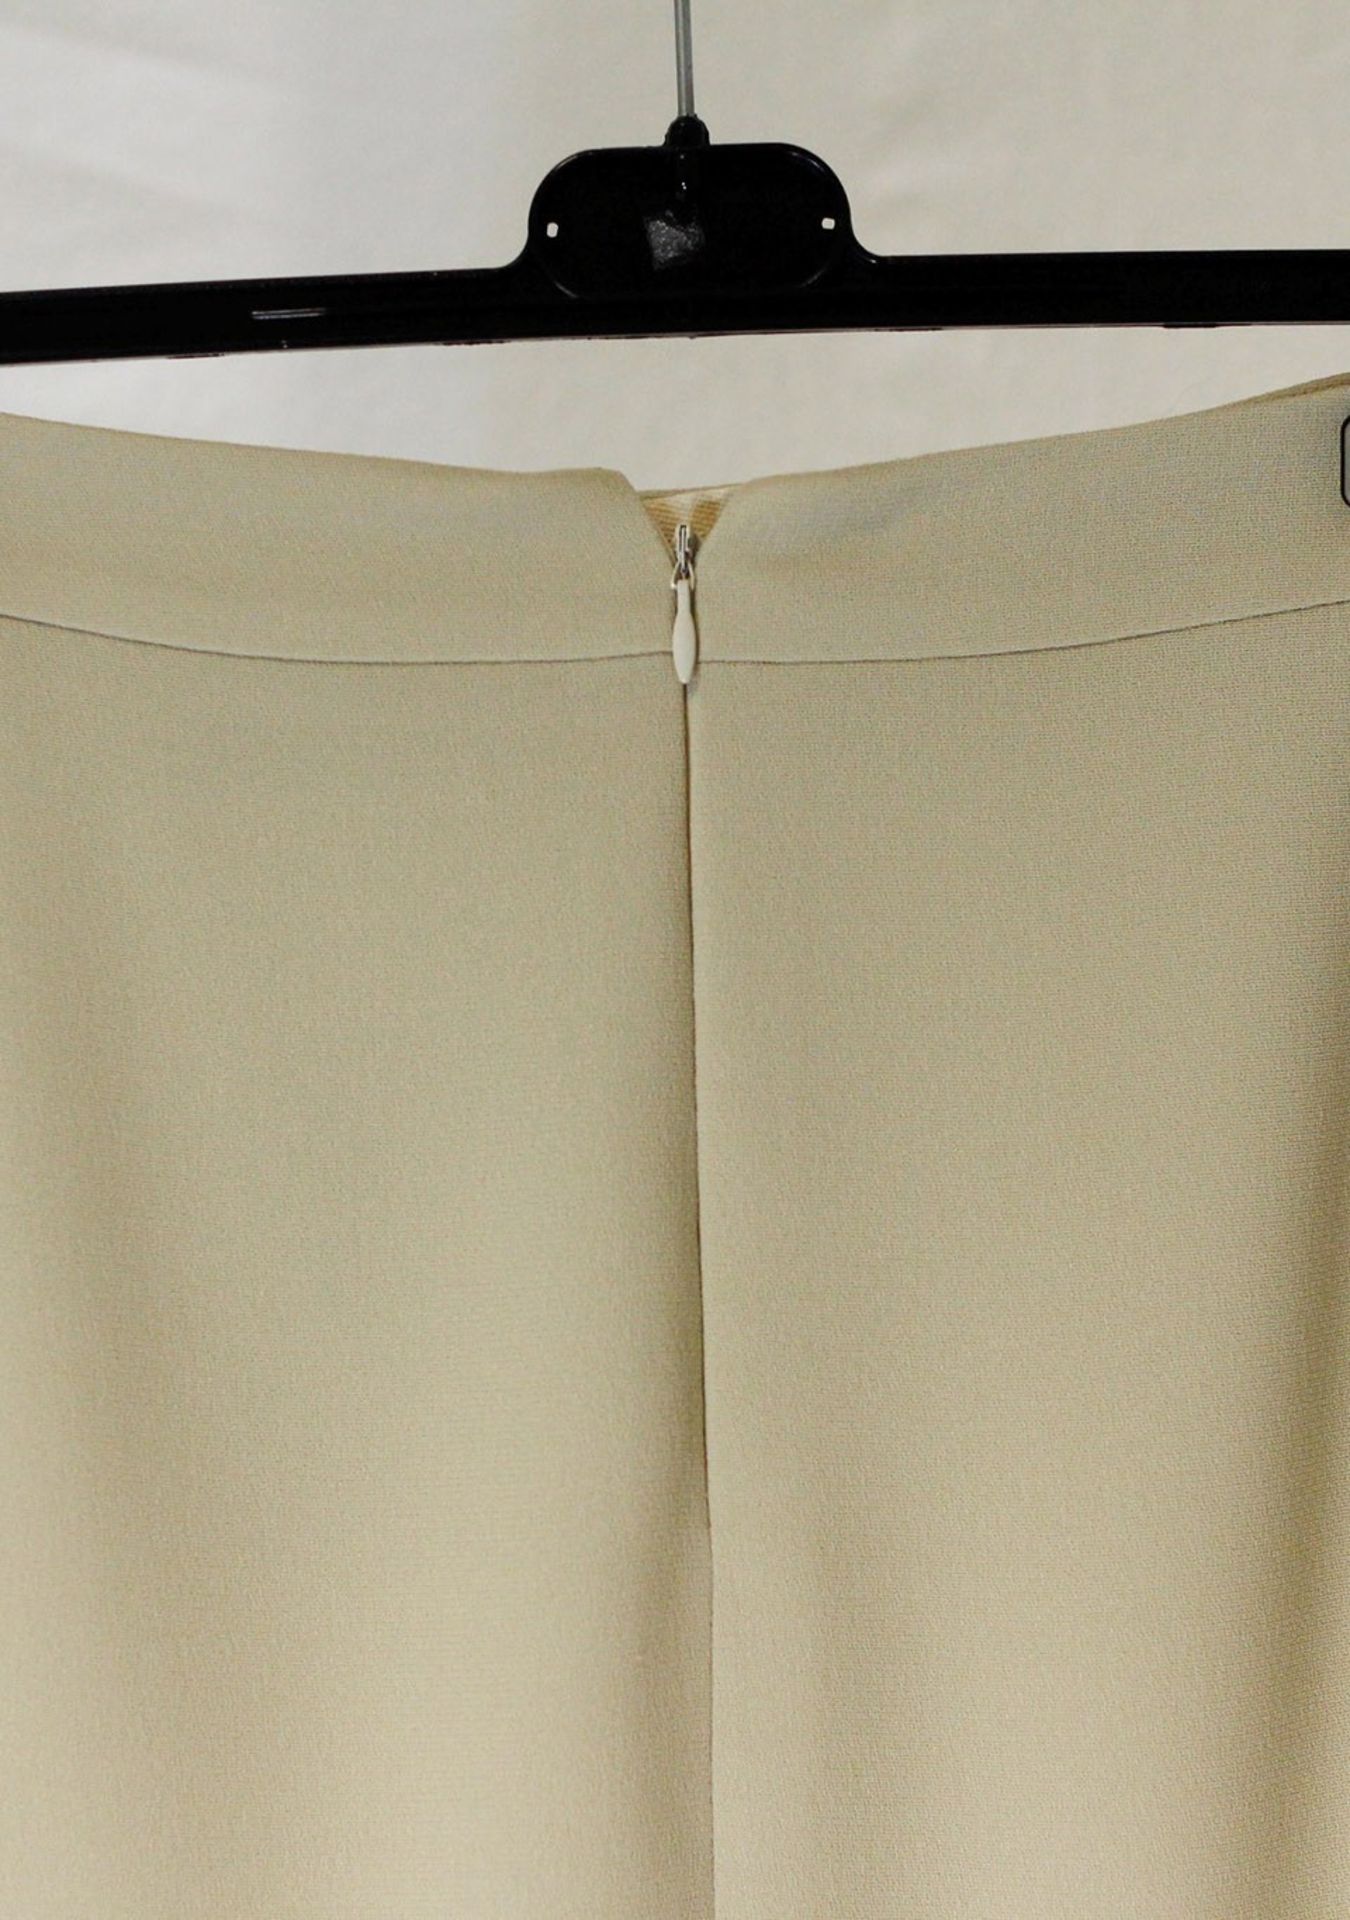 1 x Anne Belin Pistachio Skirt - Size: 20 - Material: 100% Polyester - From a High End Clothing - Image 6 of 12